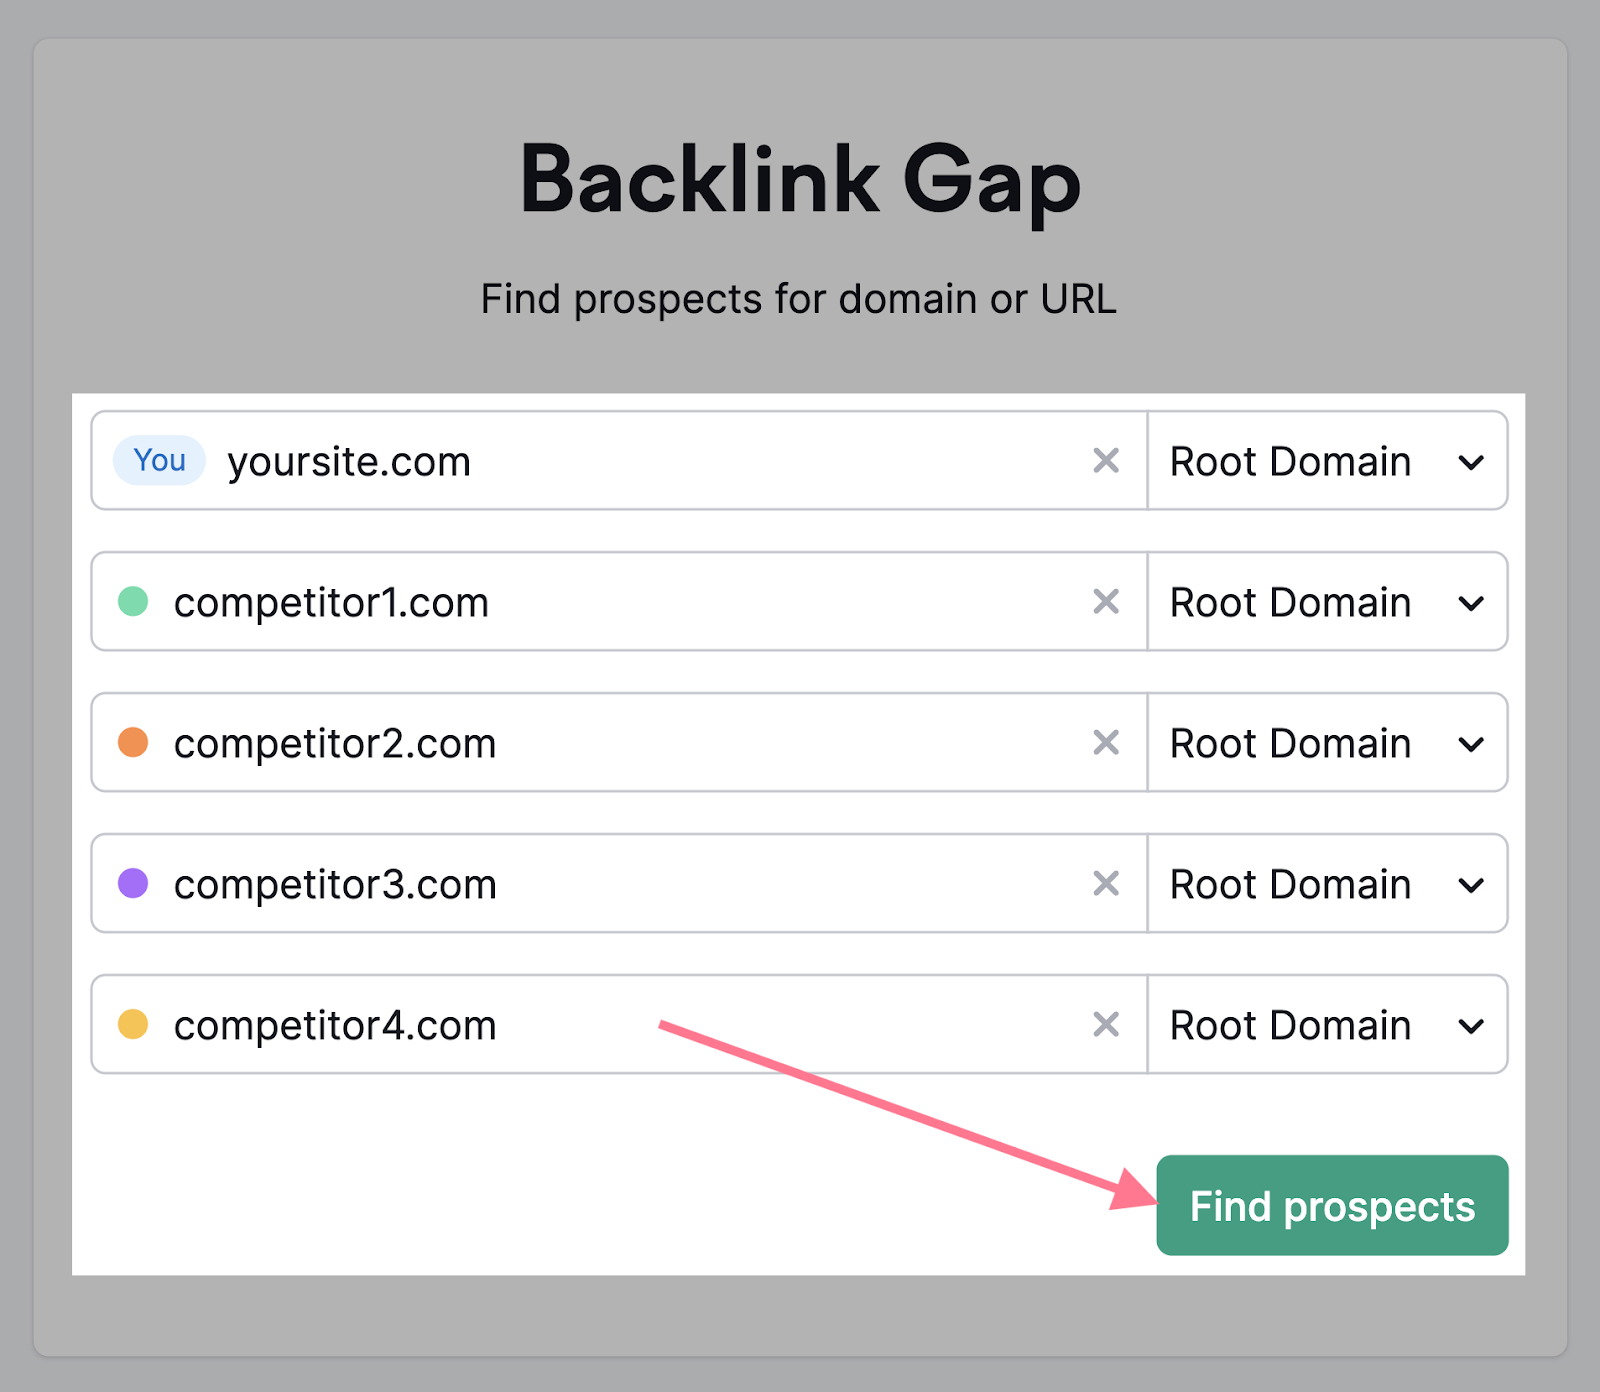 Find prospects button in Backlink Gap tool